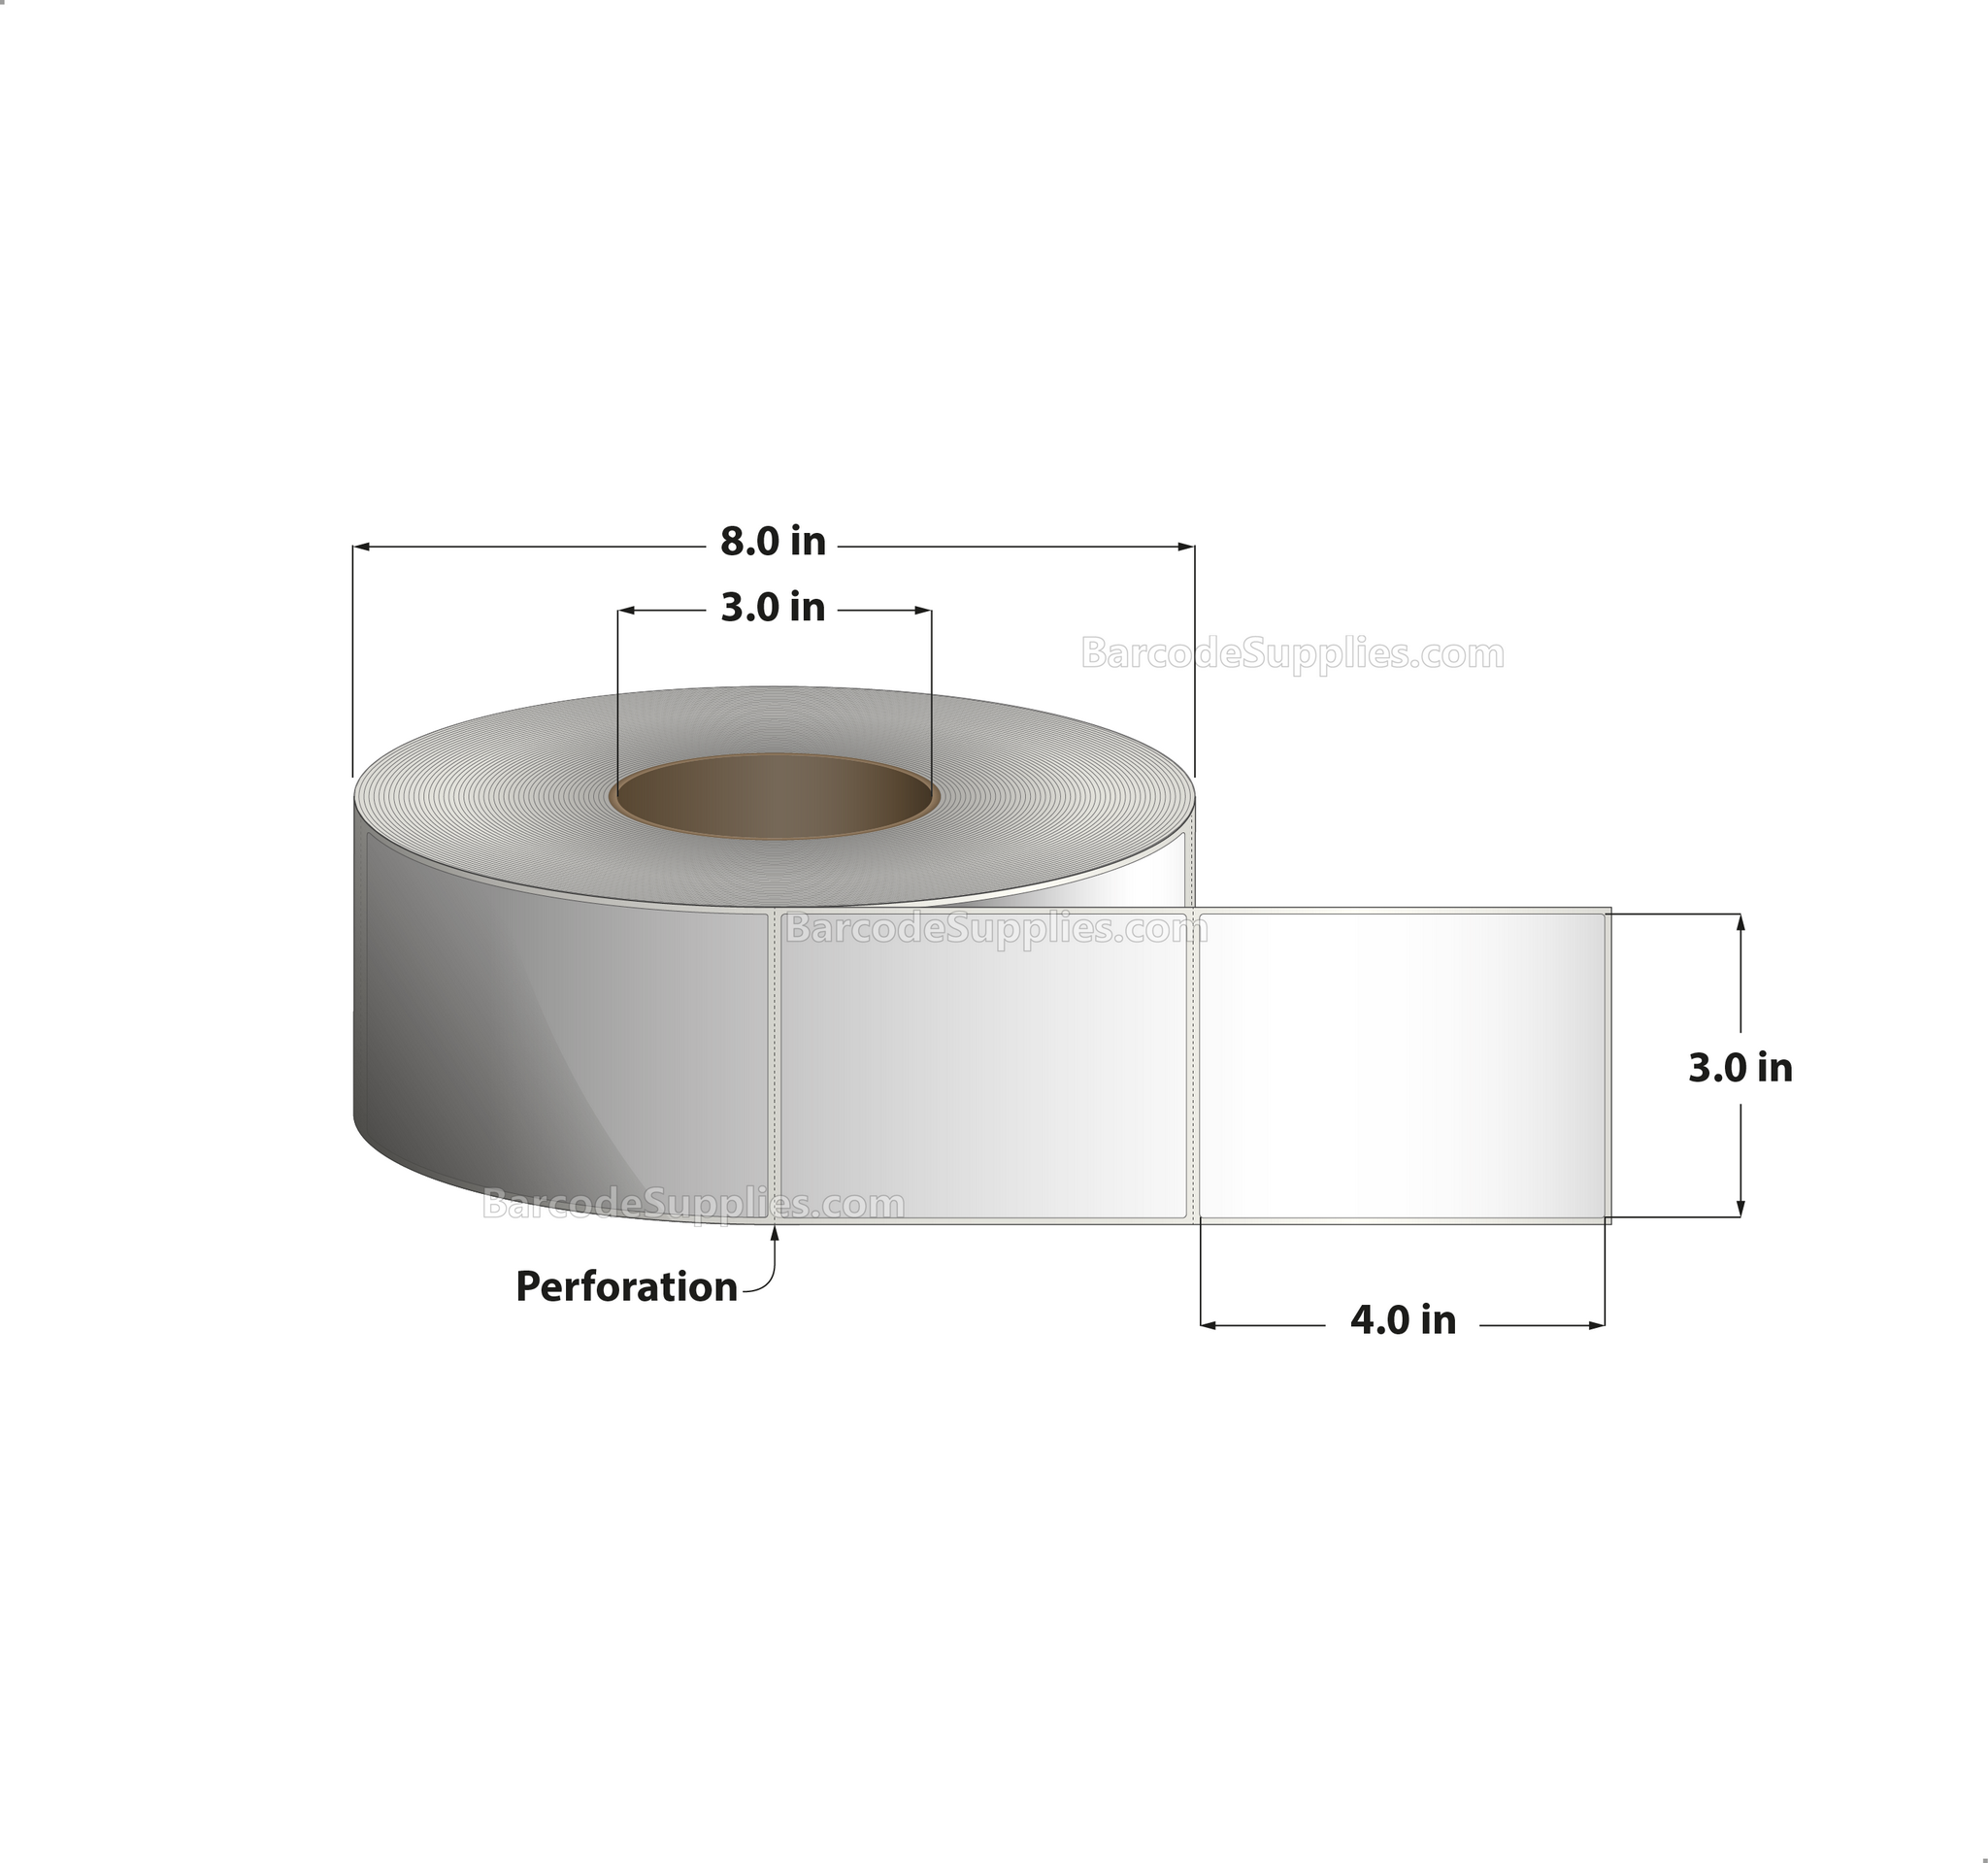 3 x 4 Thermal Transfer White Labels With Permanent Acrylic Adhesive - Perforated - 1500 Labels Per Roll - Carton Of 8 Rolls - 12000 Labels Total - MPN: TH34-1P